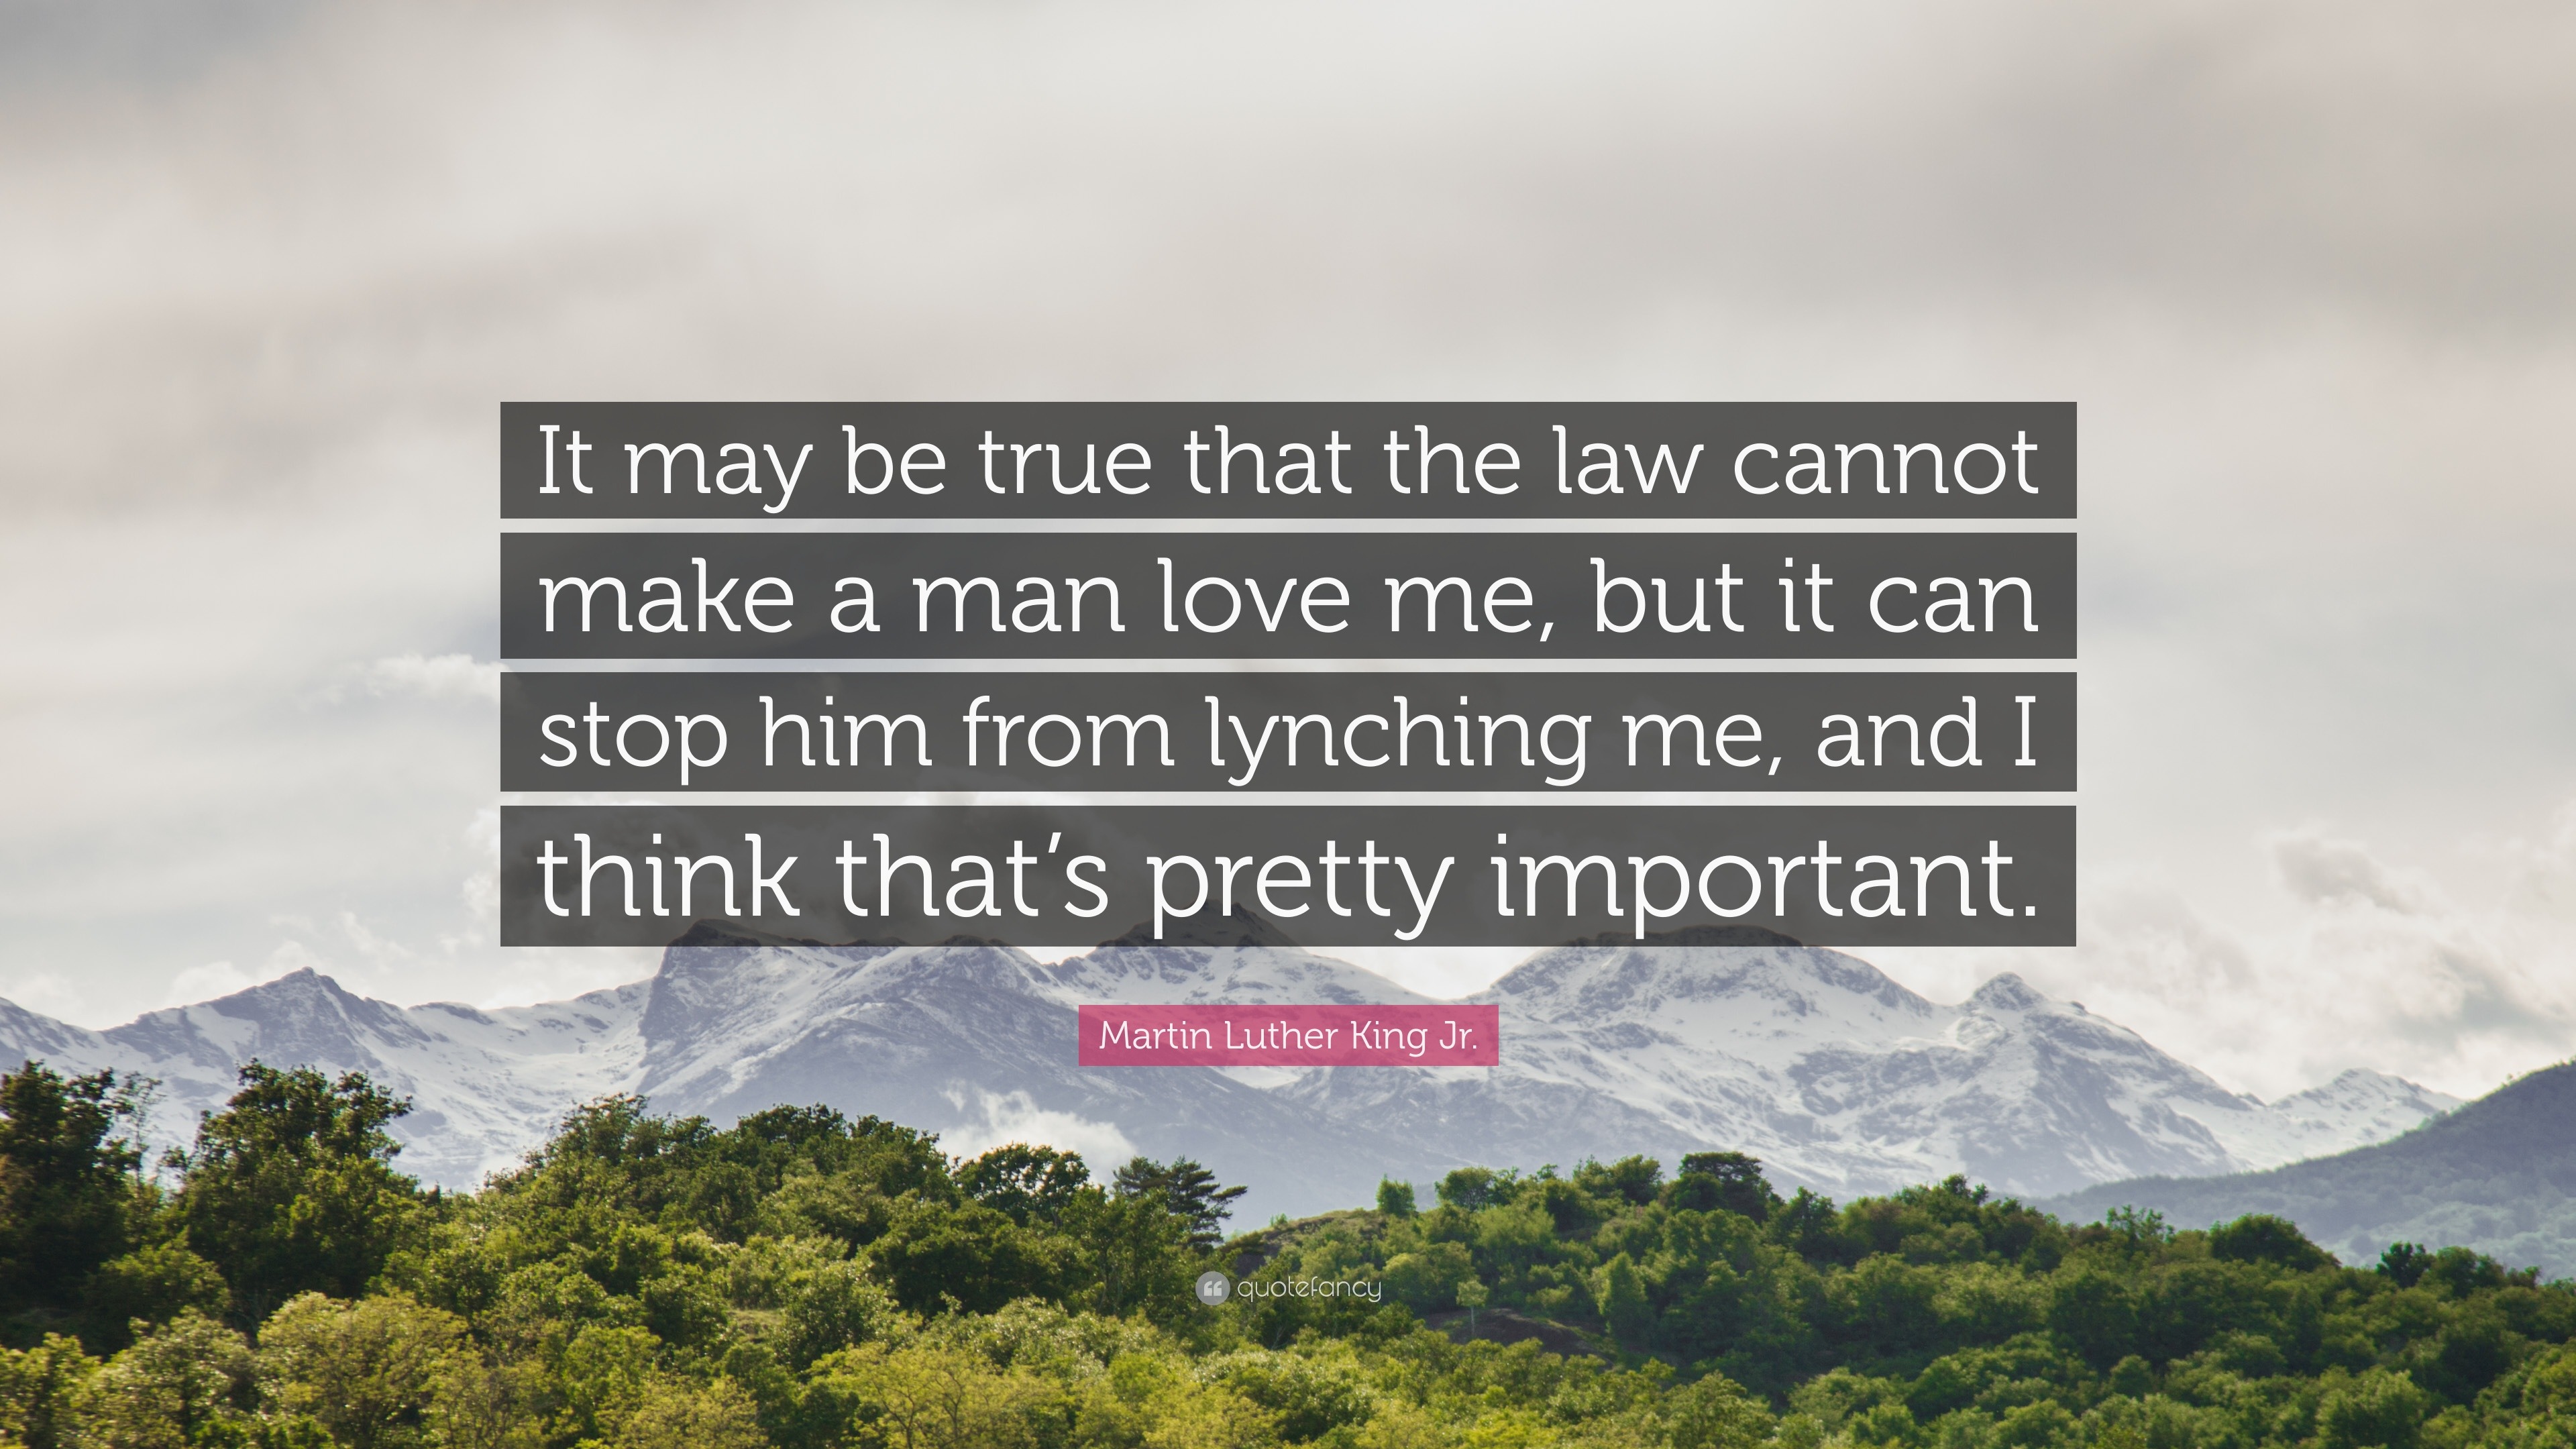 Martin Luther King Jr Quote “It may be true that the law cannot